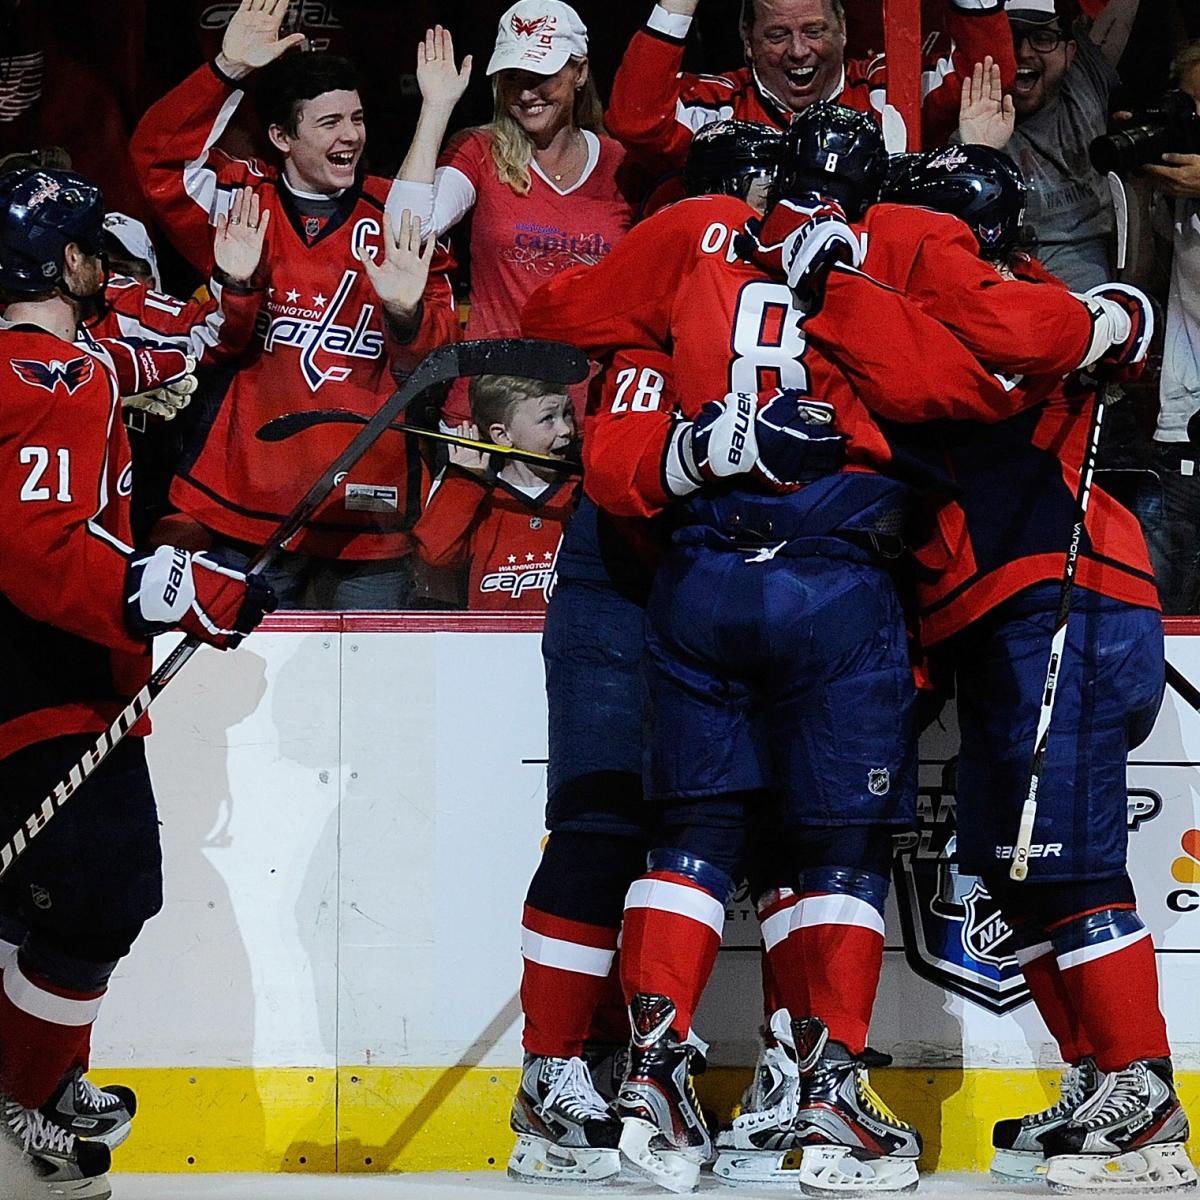 Washington Capitals Schedule Released, 5 Games to Look Forward To